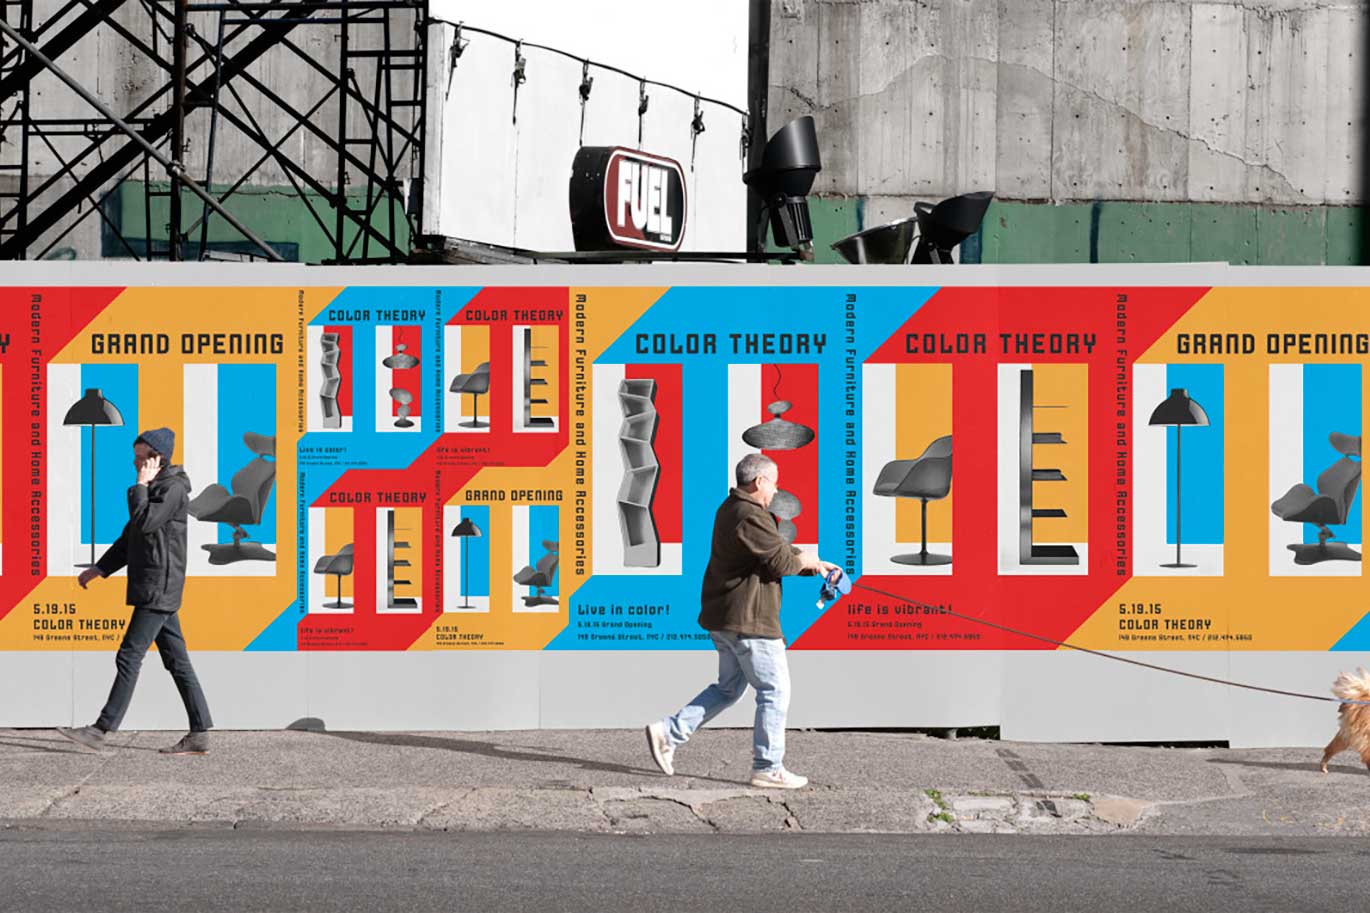 Wheatpasting® Campaigns Are Taking Over Marketing